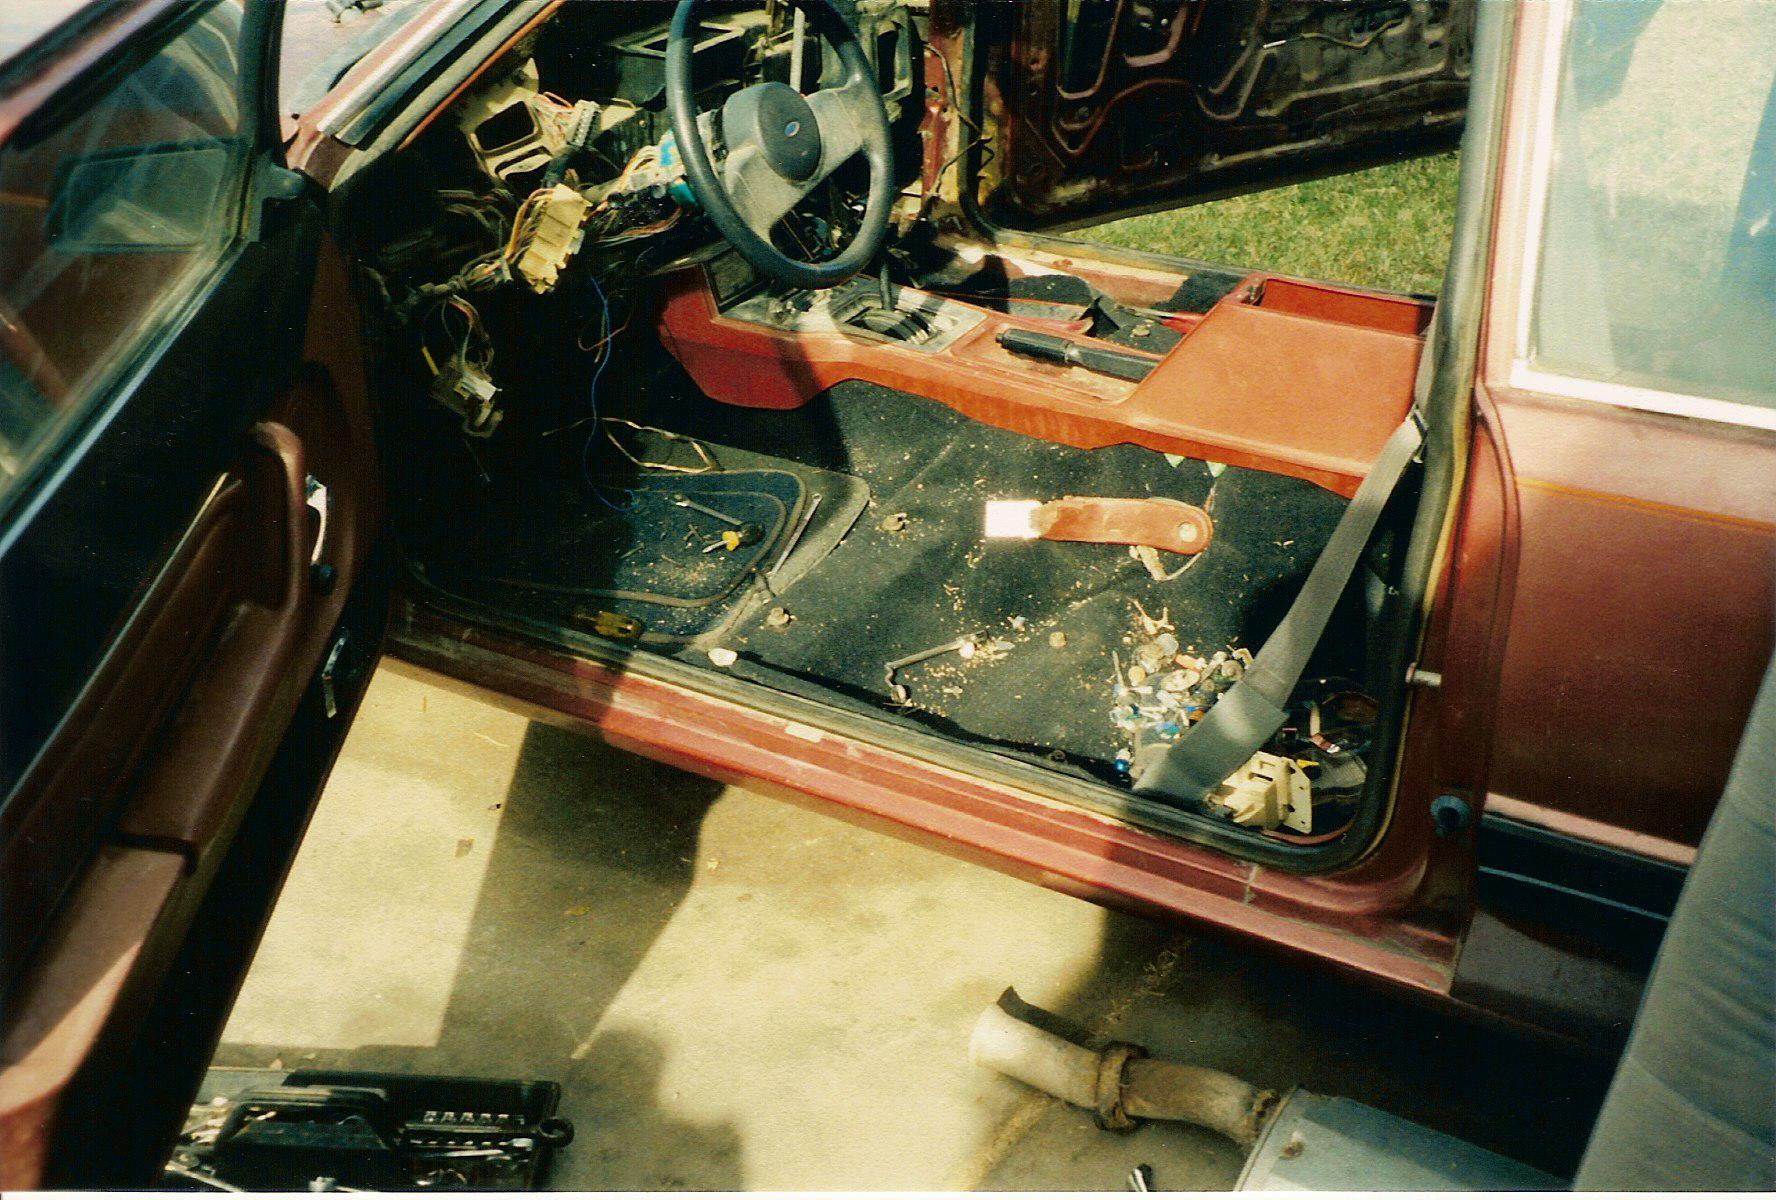 Stripping the interior.